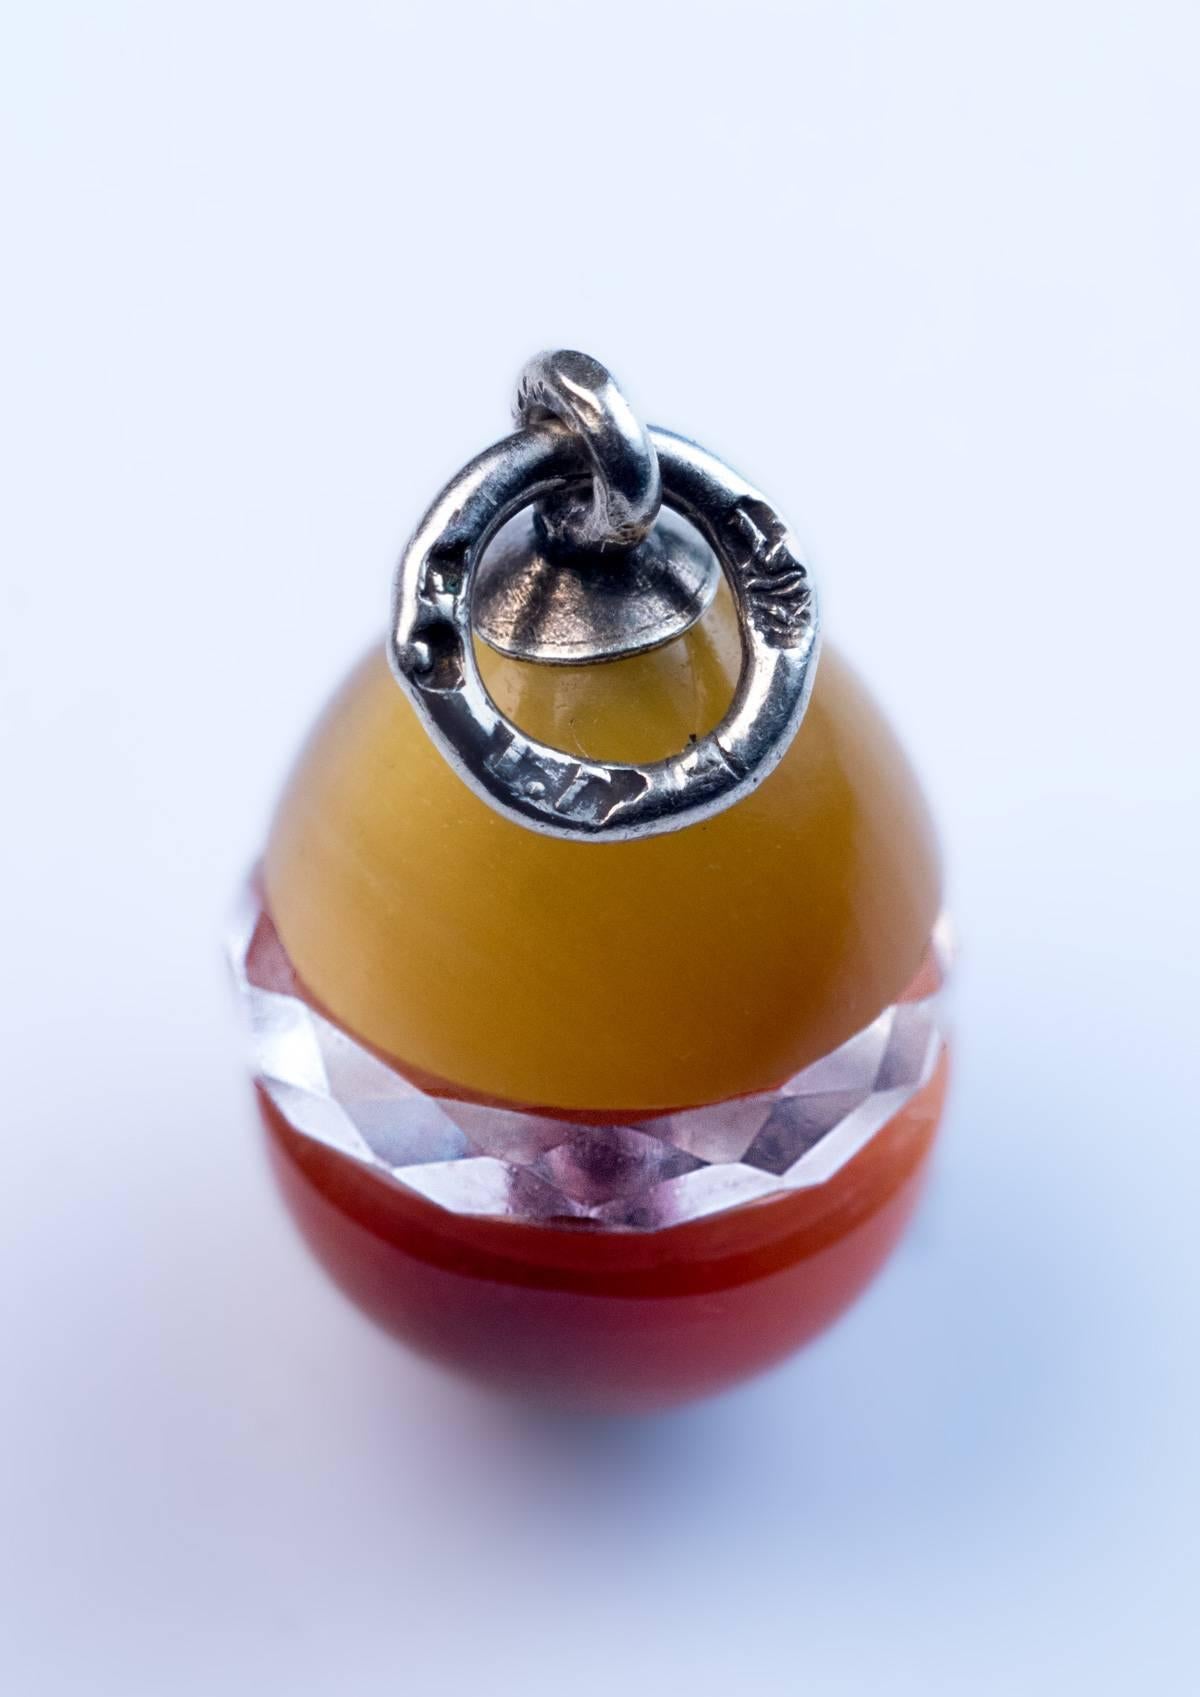 Circa 1890

A highly unusual antique Russian silver mounted cat’s eye egg pendant. The egg consists of two carved chrysoberyls with bold cat’s eye effect (chatoyancy) separated with a faceted rock crystal band.

Marked on the silver suspension